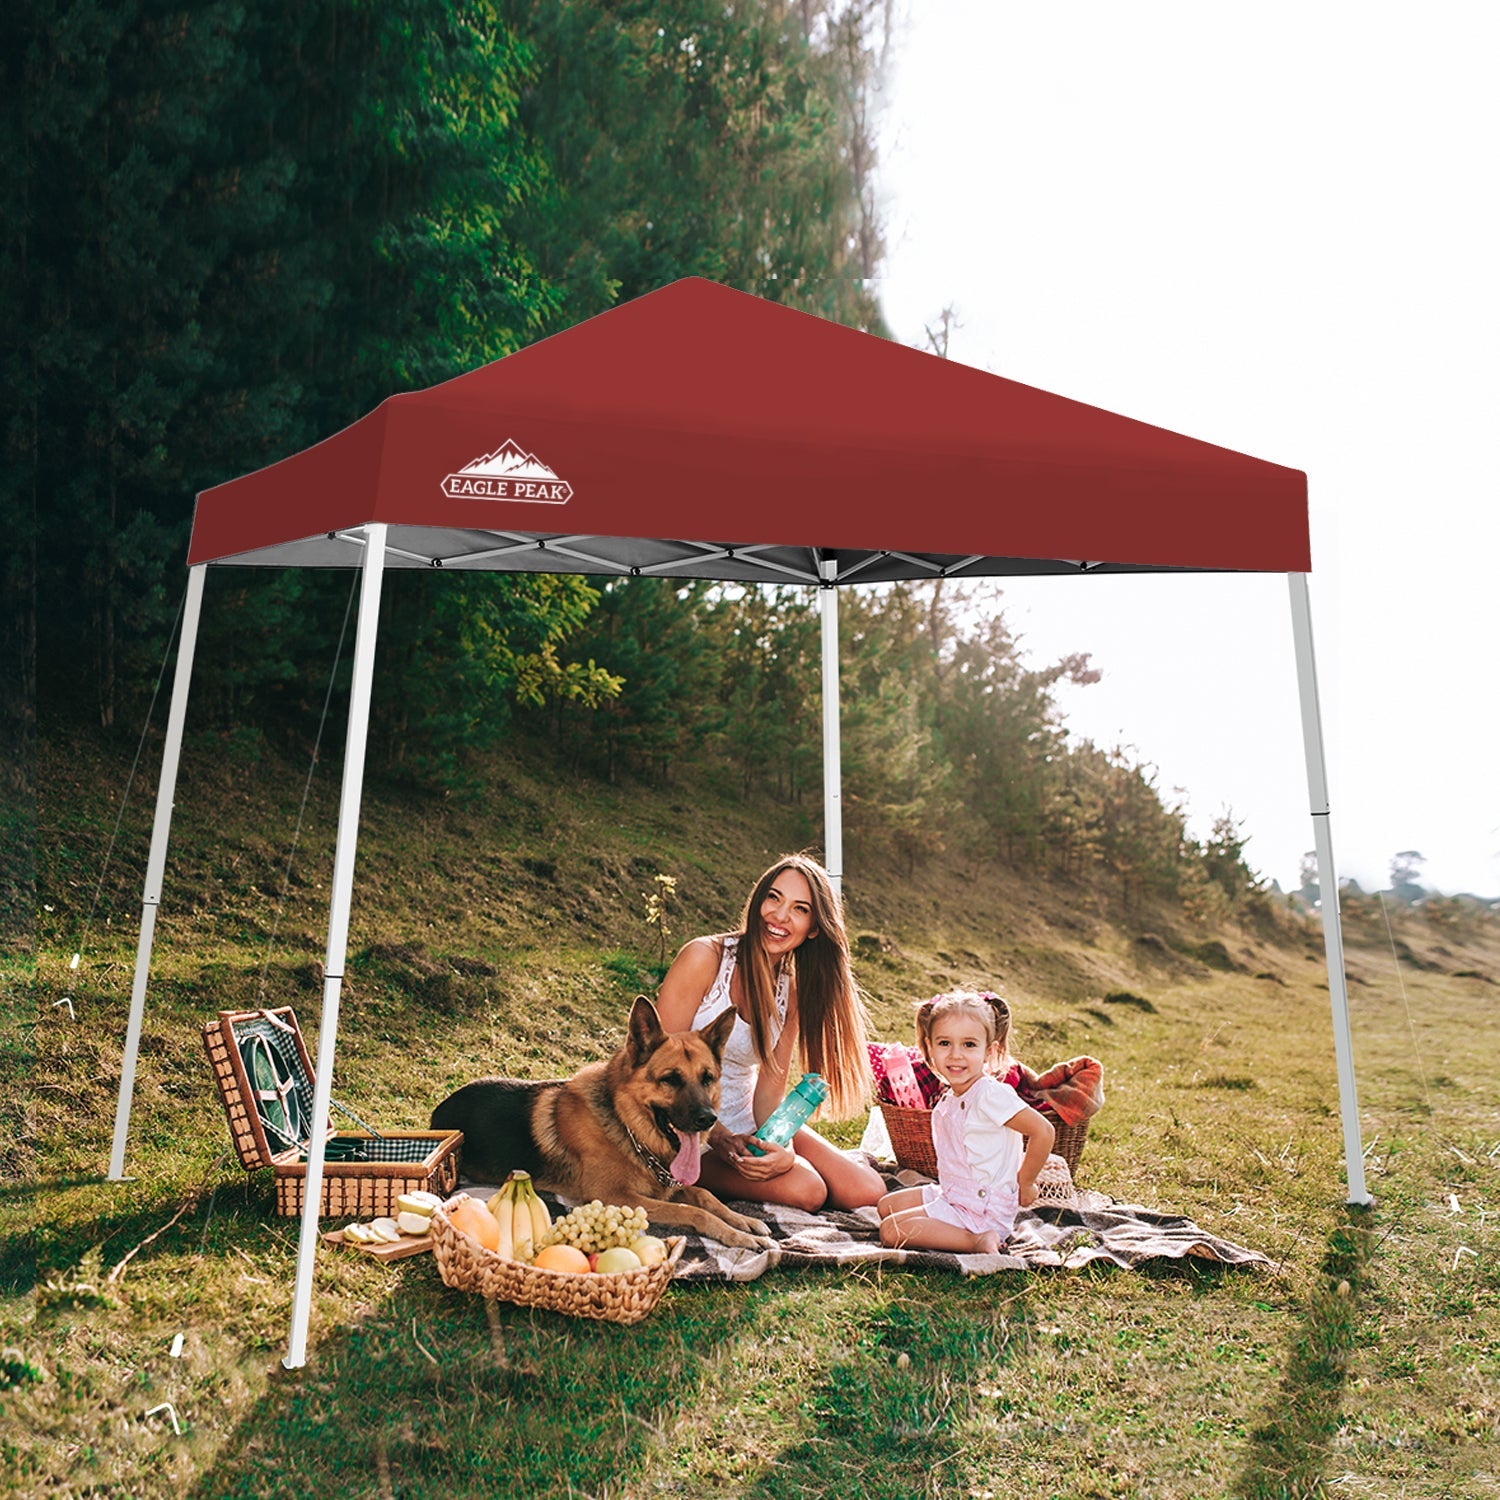 EAGLE PEAK 10' x 10' Slant Leg Pop-up Canopy Tent Easy One Person Setup Instant Outdoor Canopy Folding Shelter with 64 Square Feet of Shade